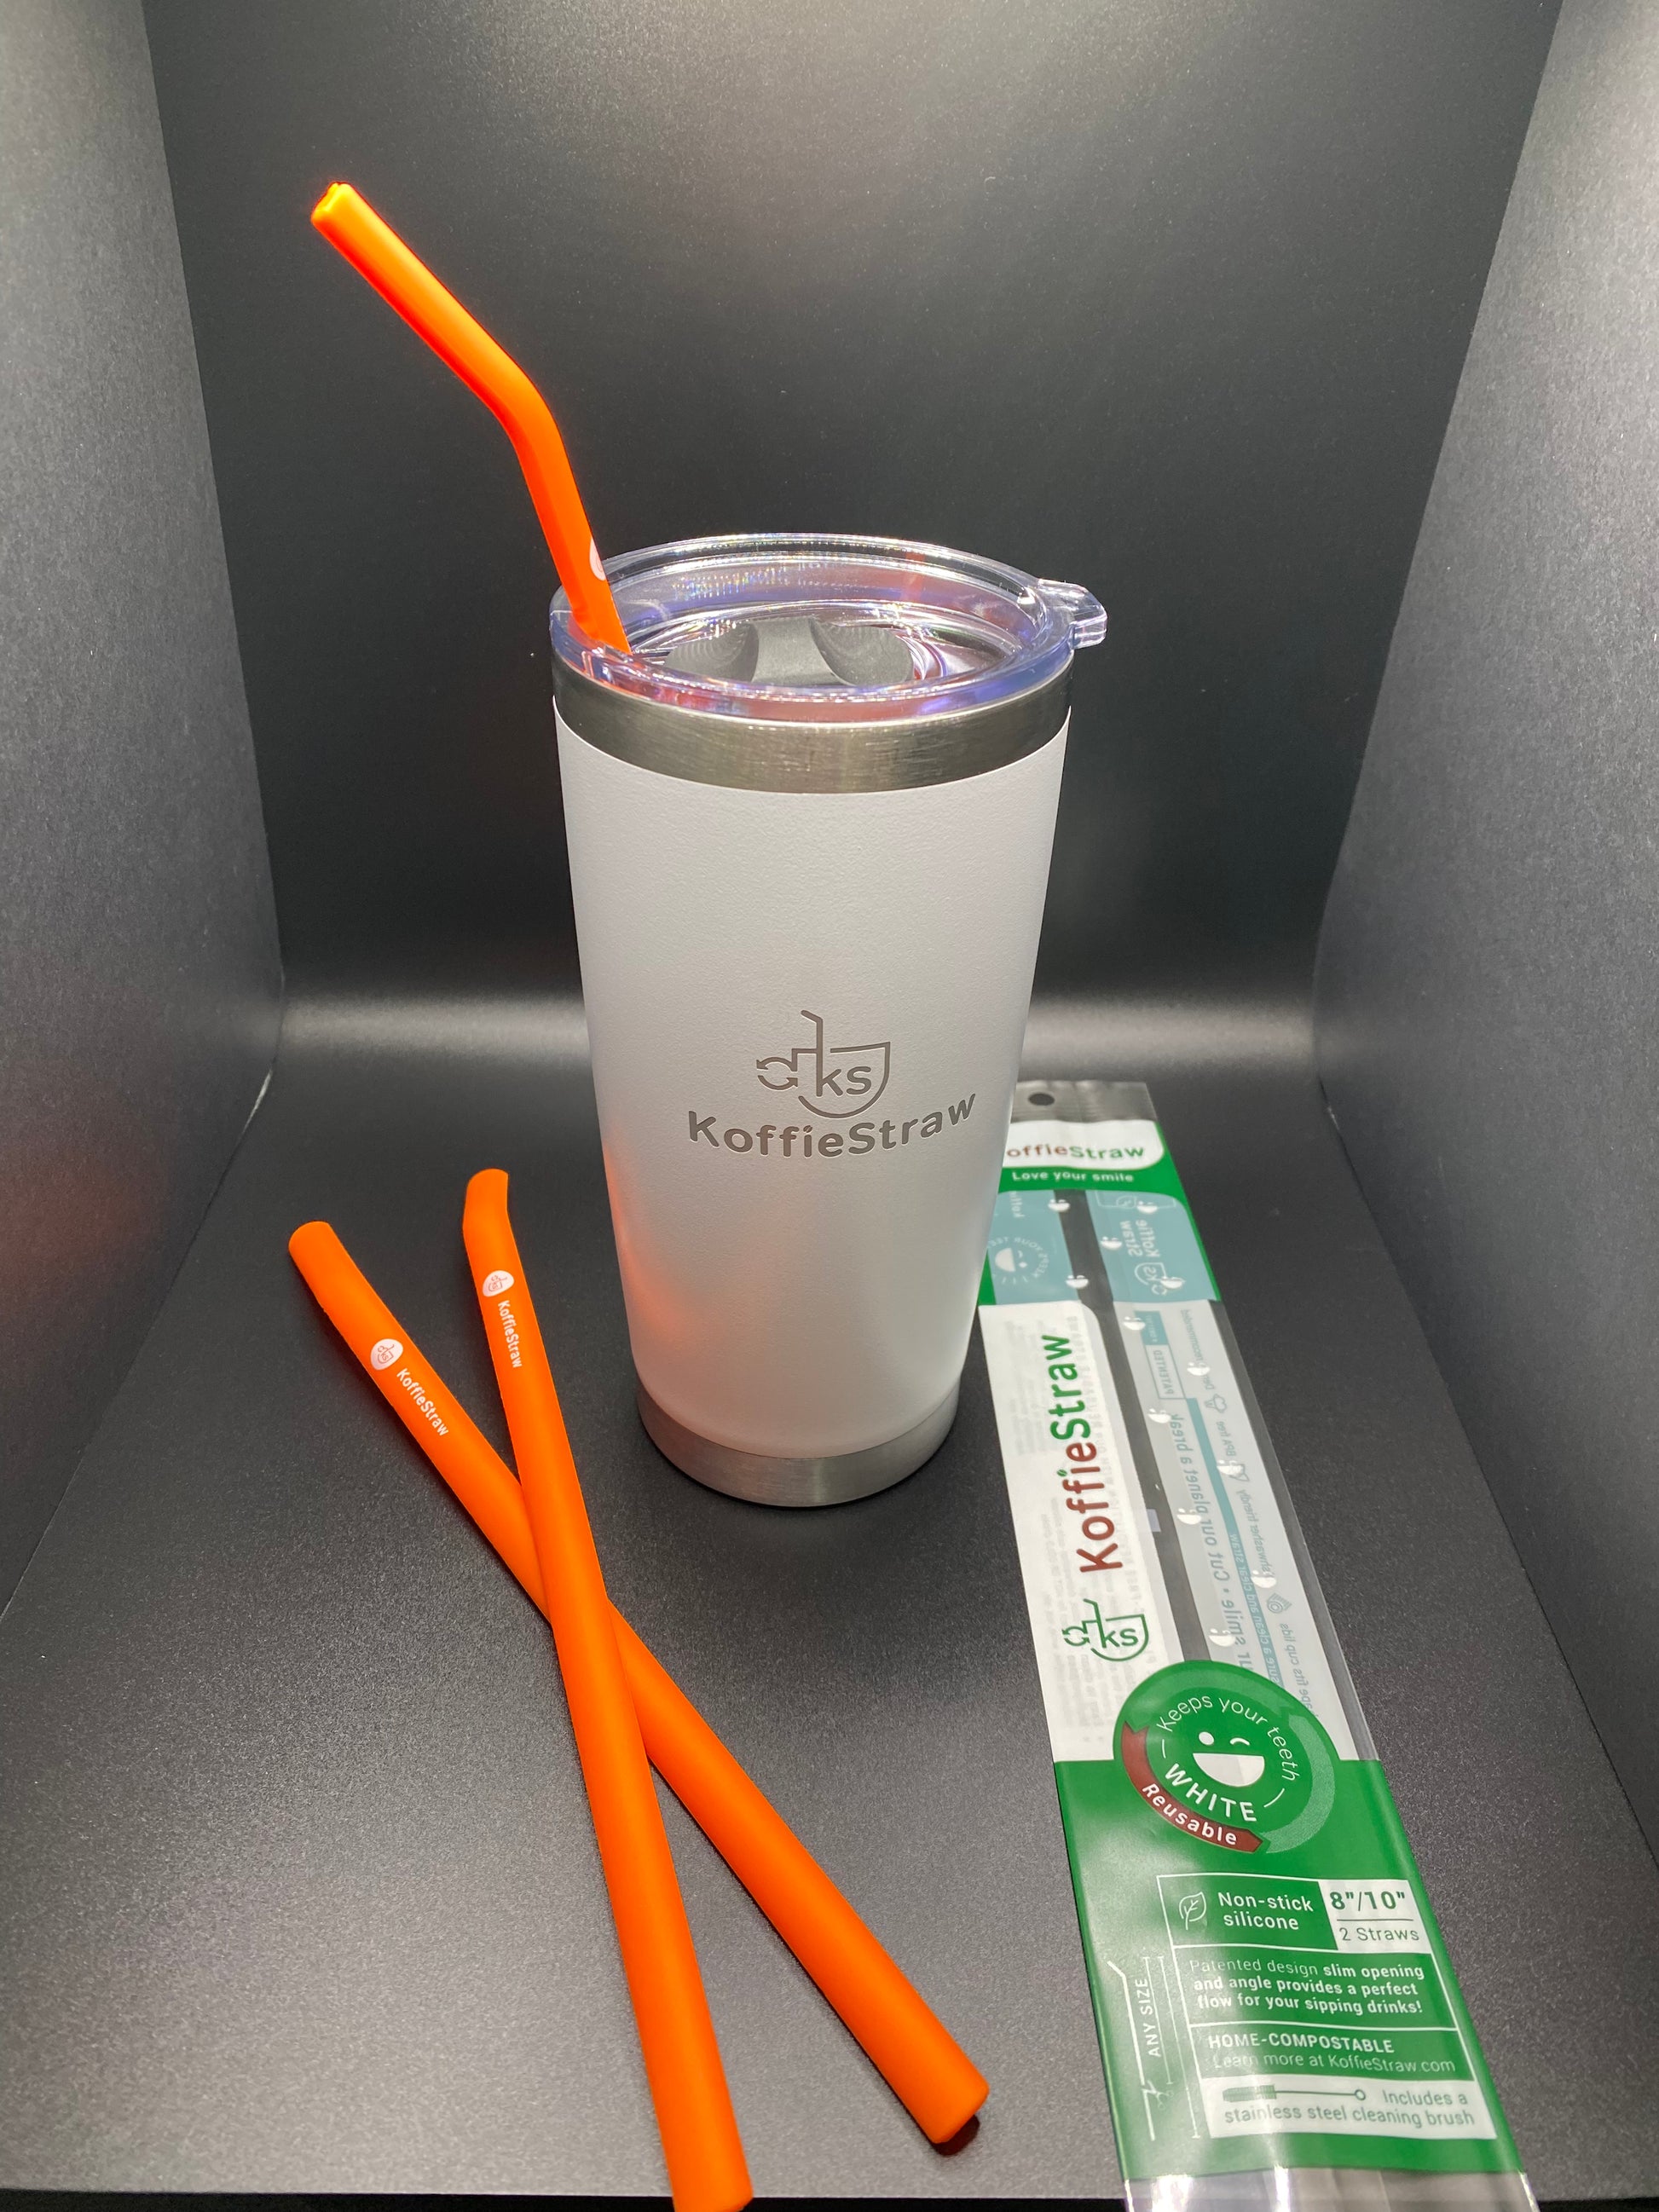 Straws And Brushes Set, Reusable Silicone Straws Including Large